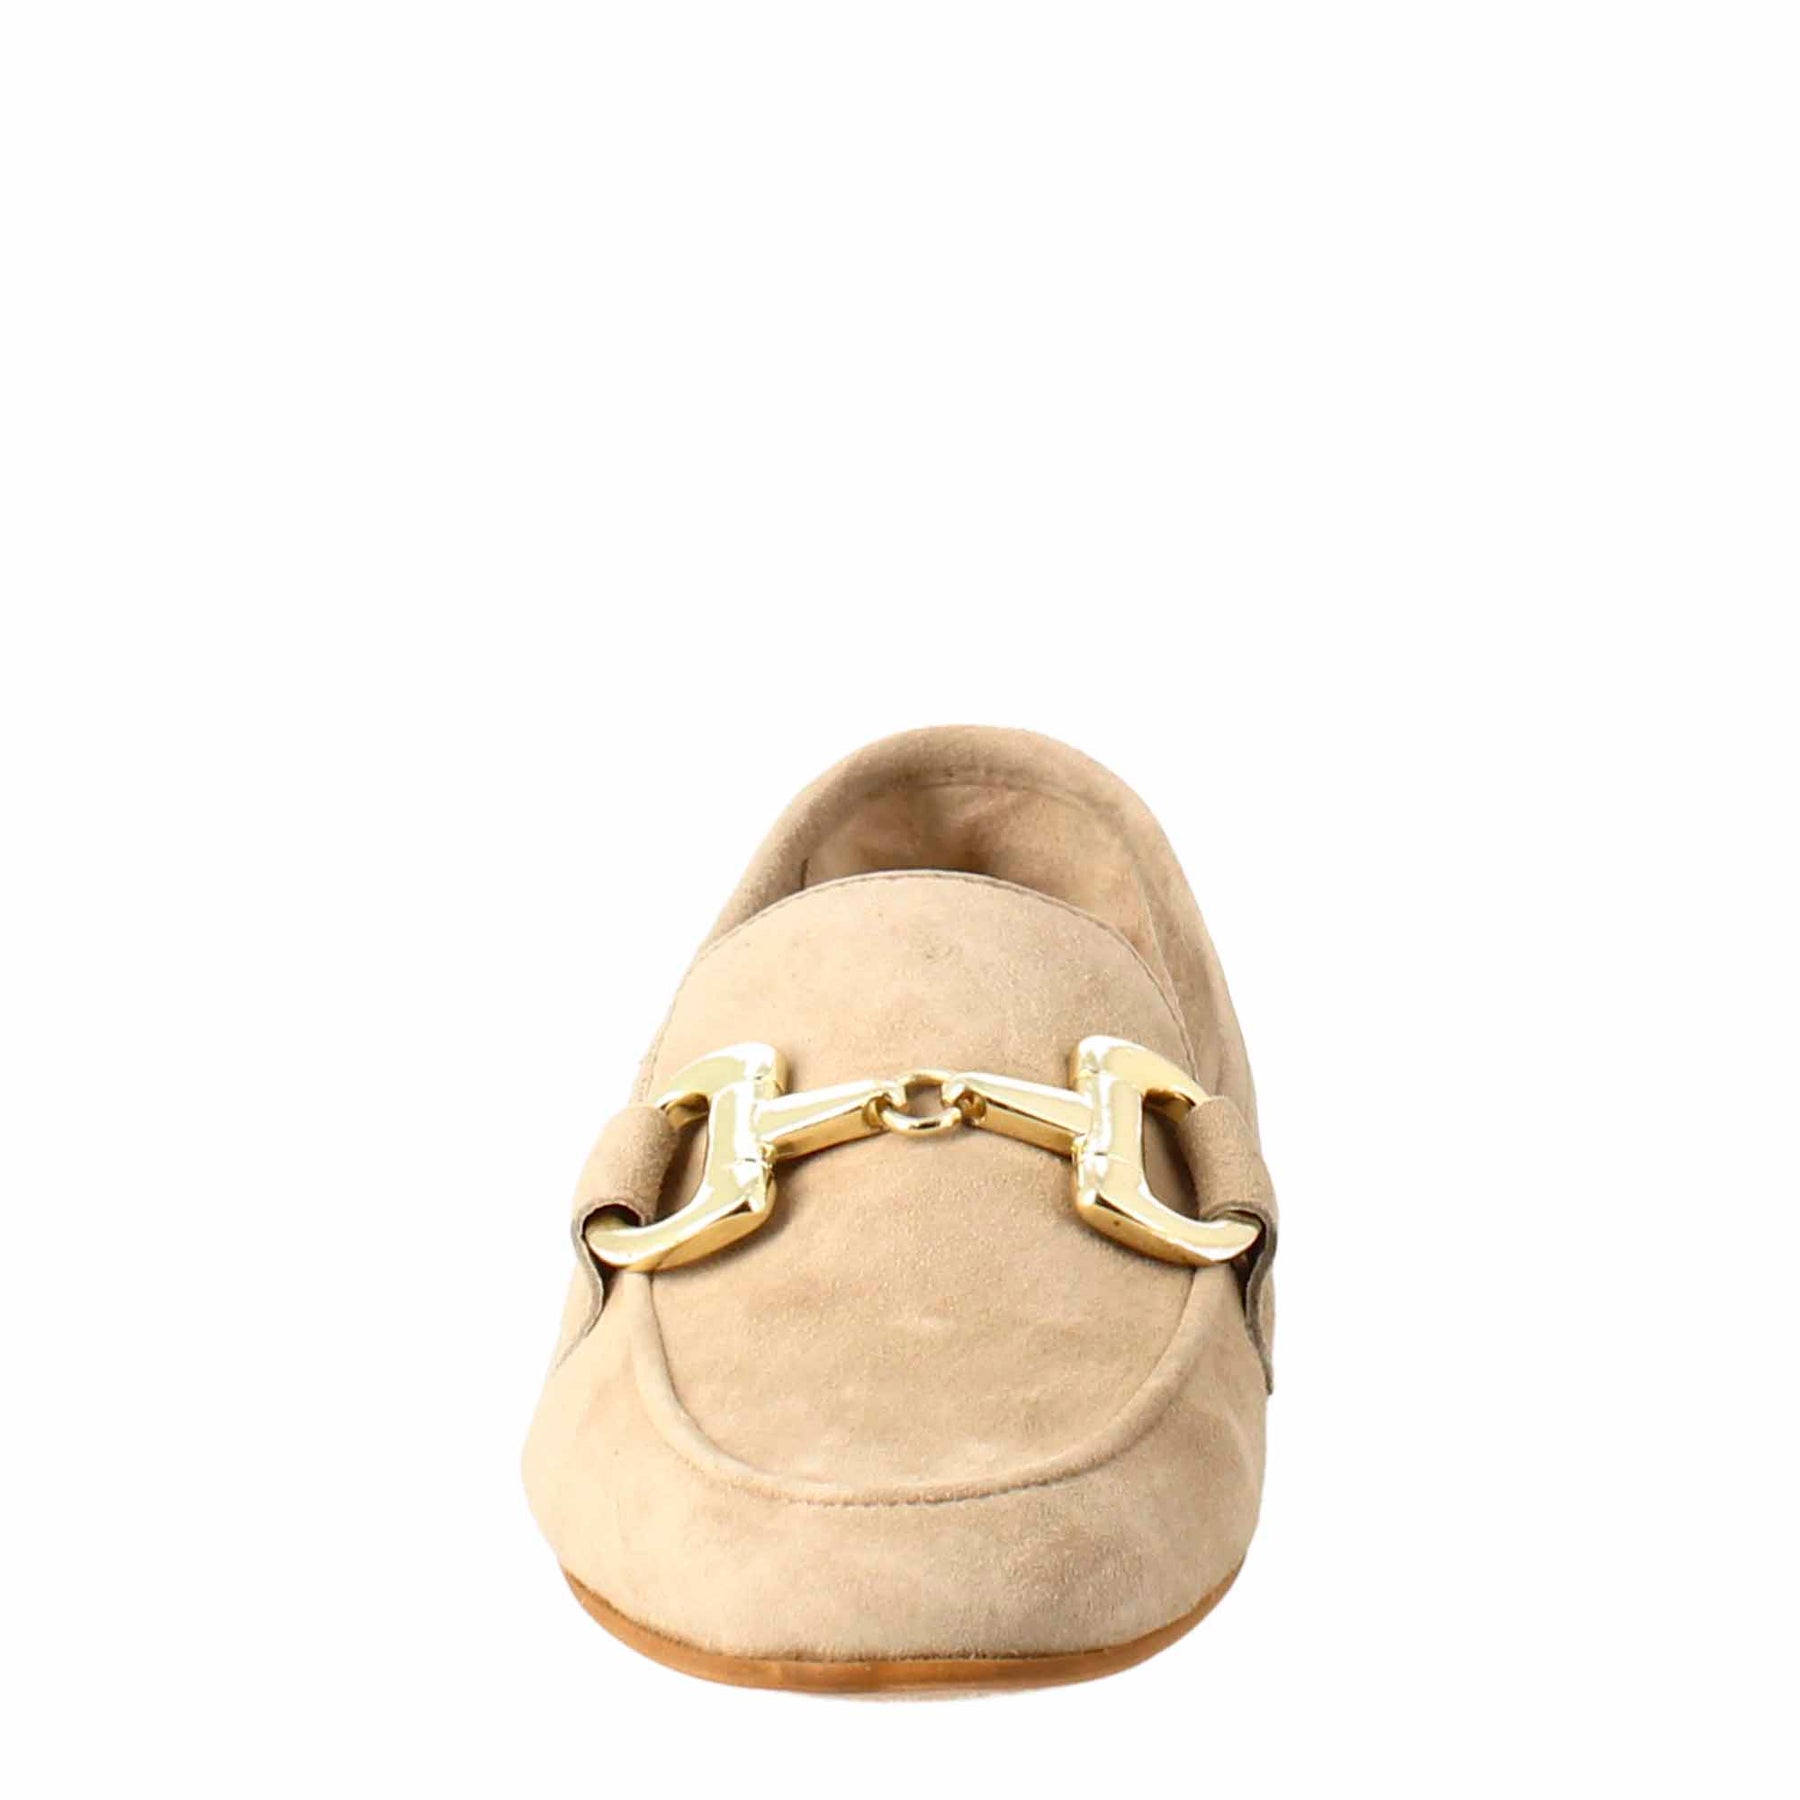 Women's moccasin in taupe suede with gold buckle